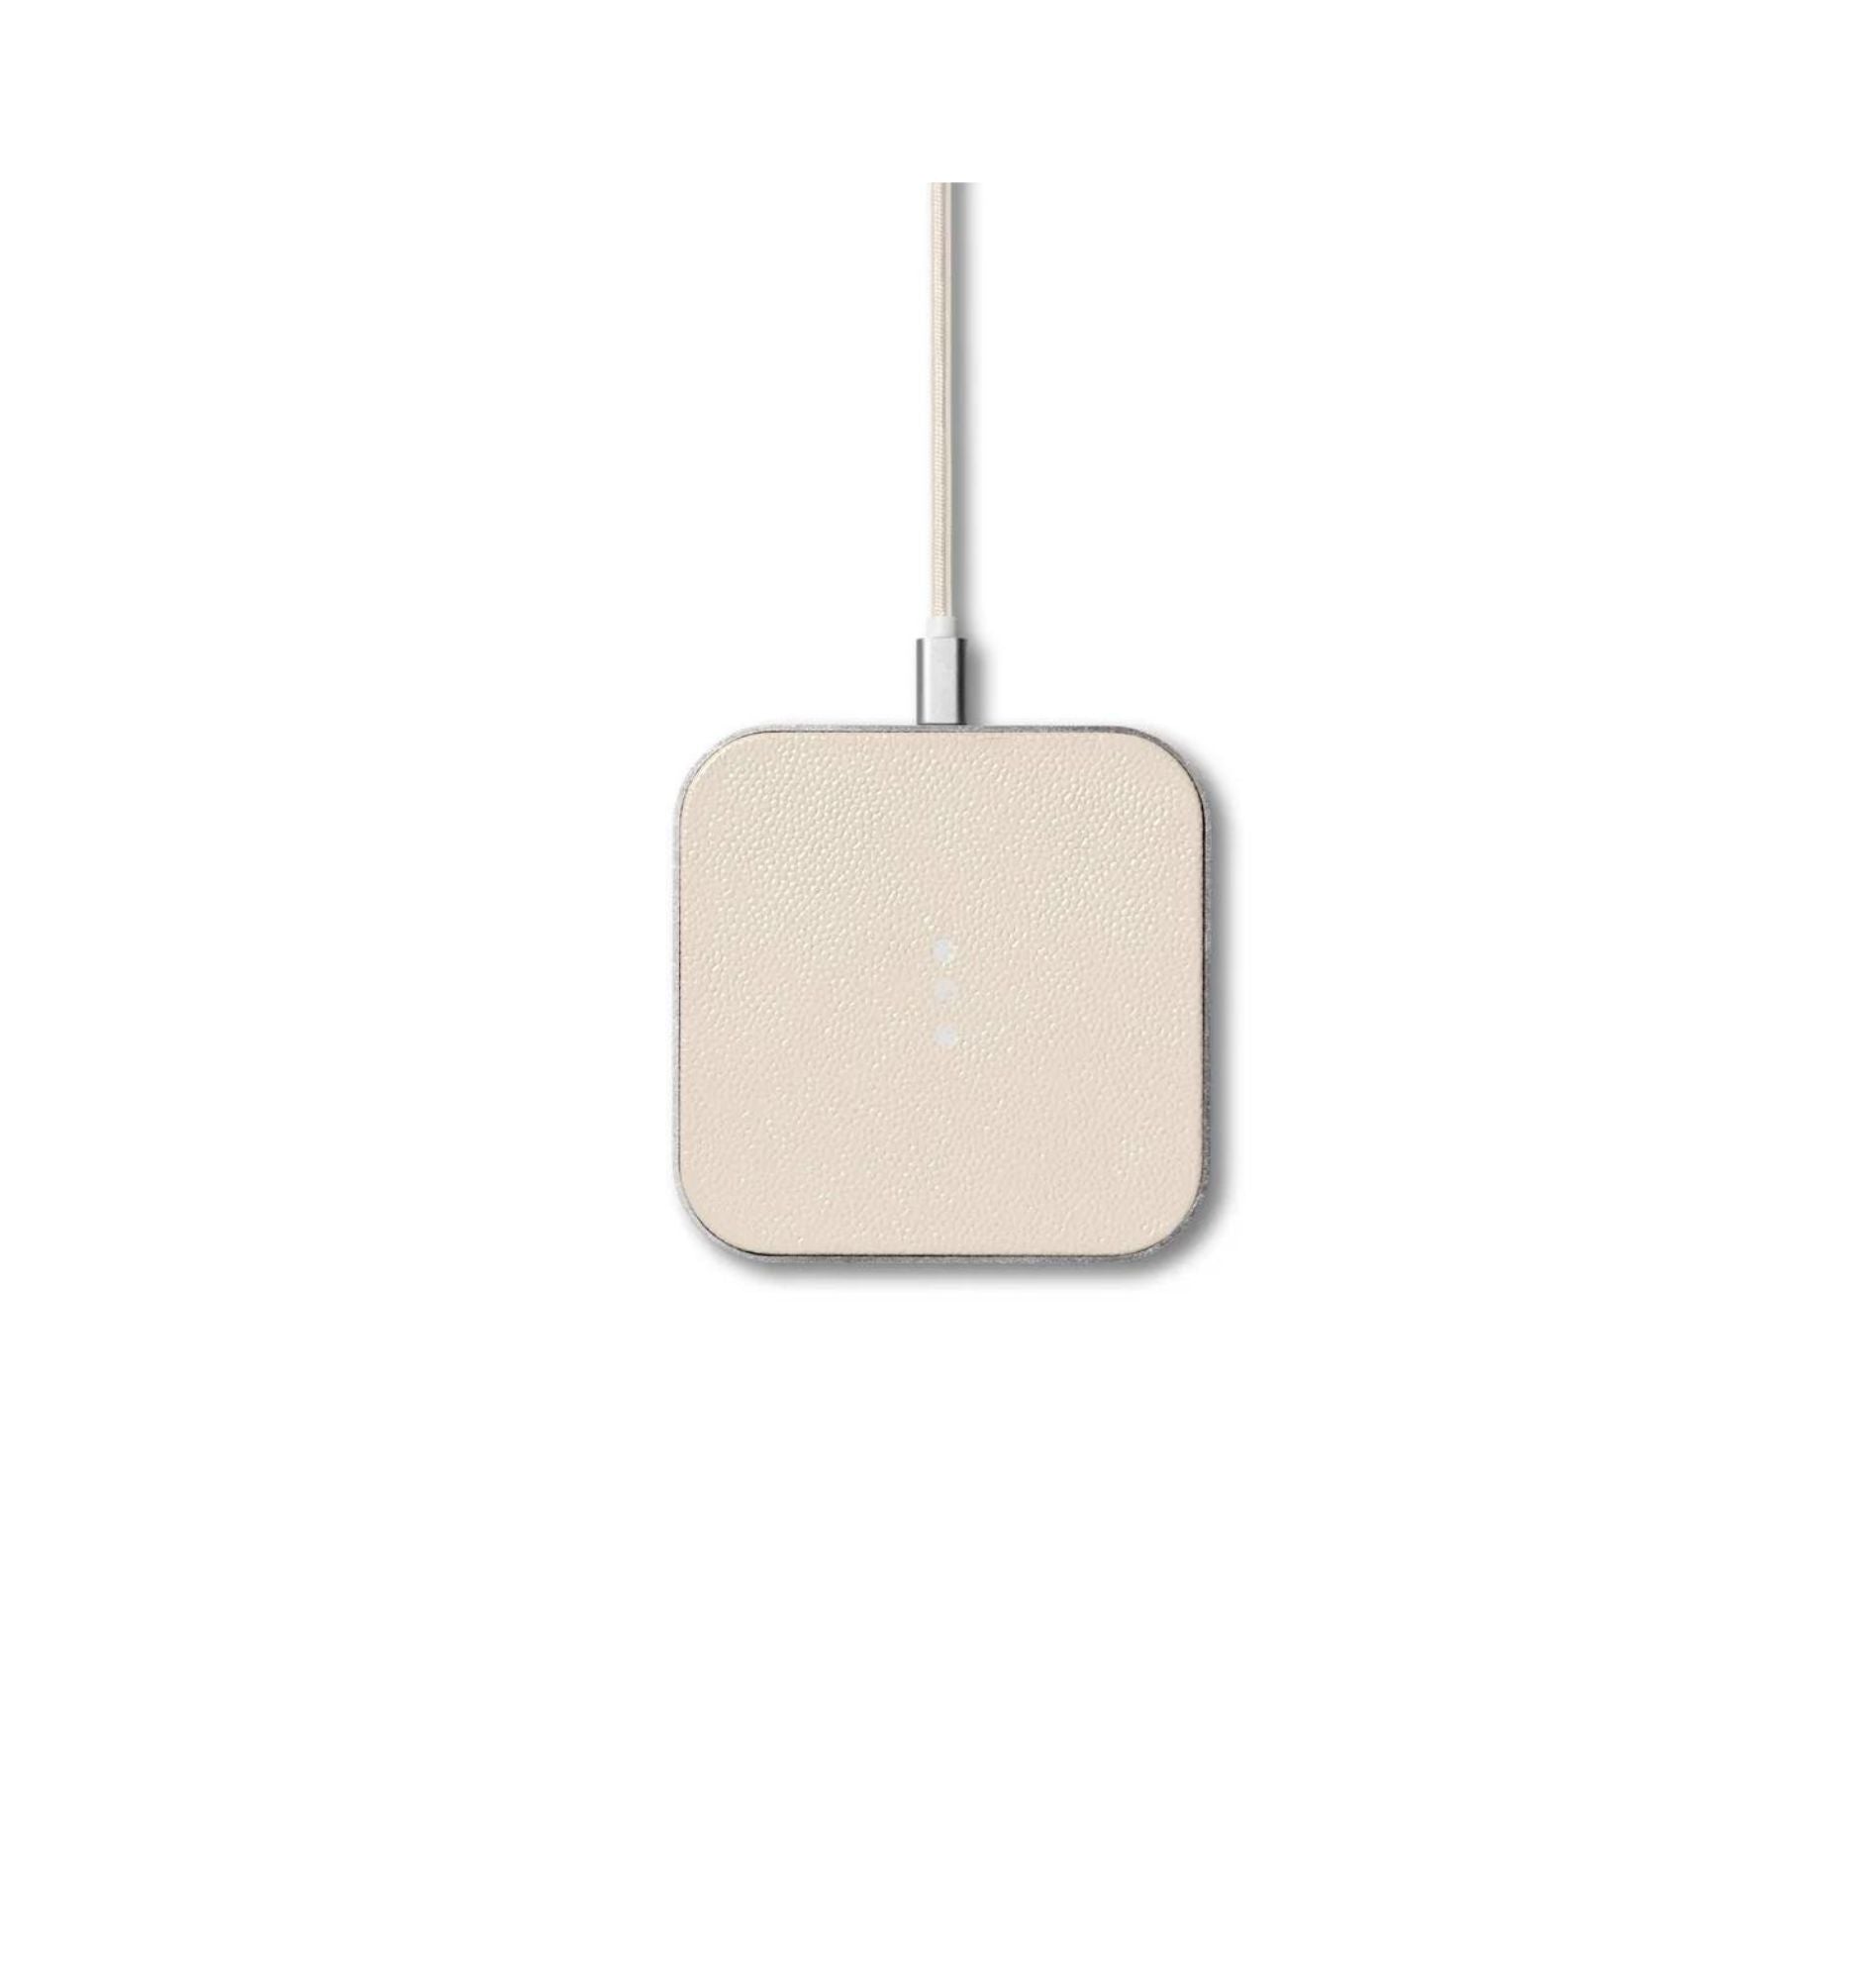 Courant Wireless Charger, Bone